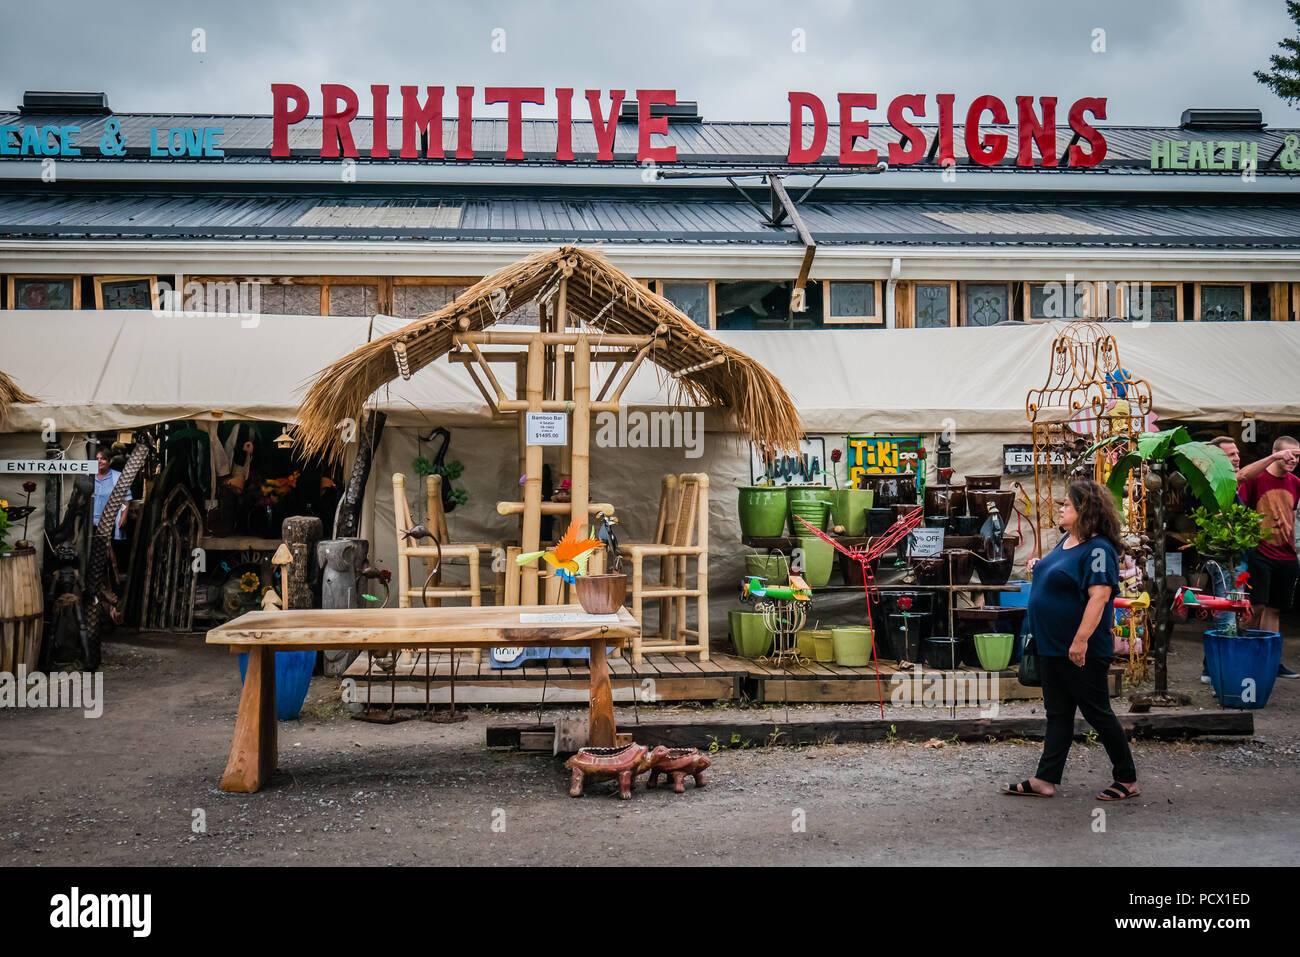 primitive design is an unique art and home décor store in hope port canada Stock Photo